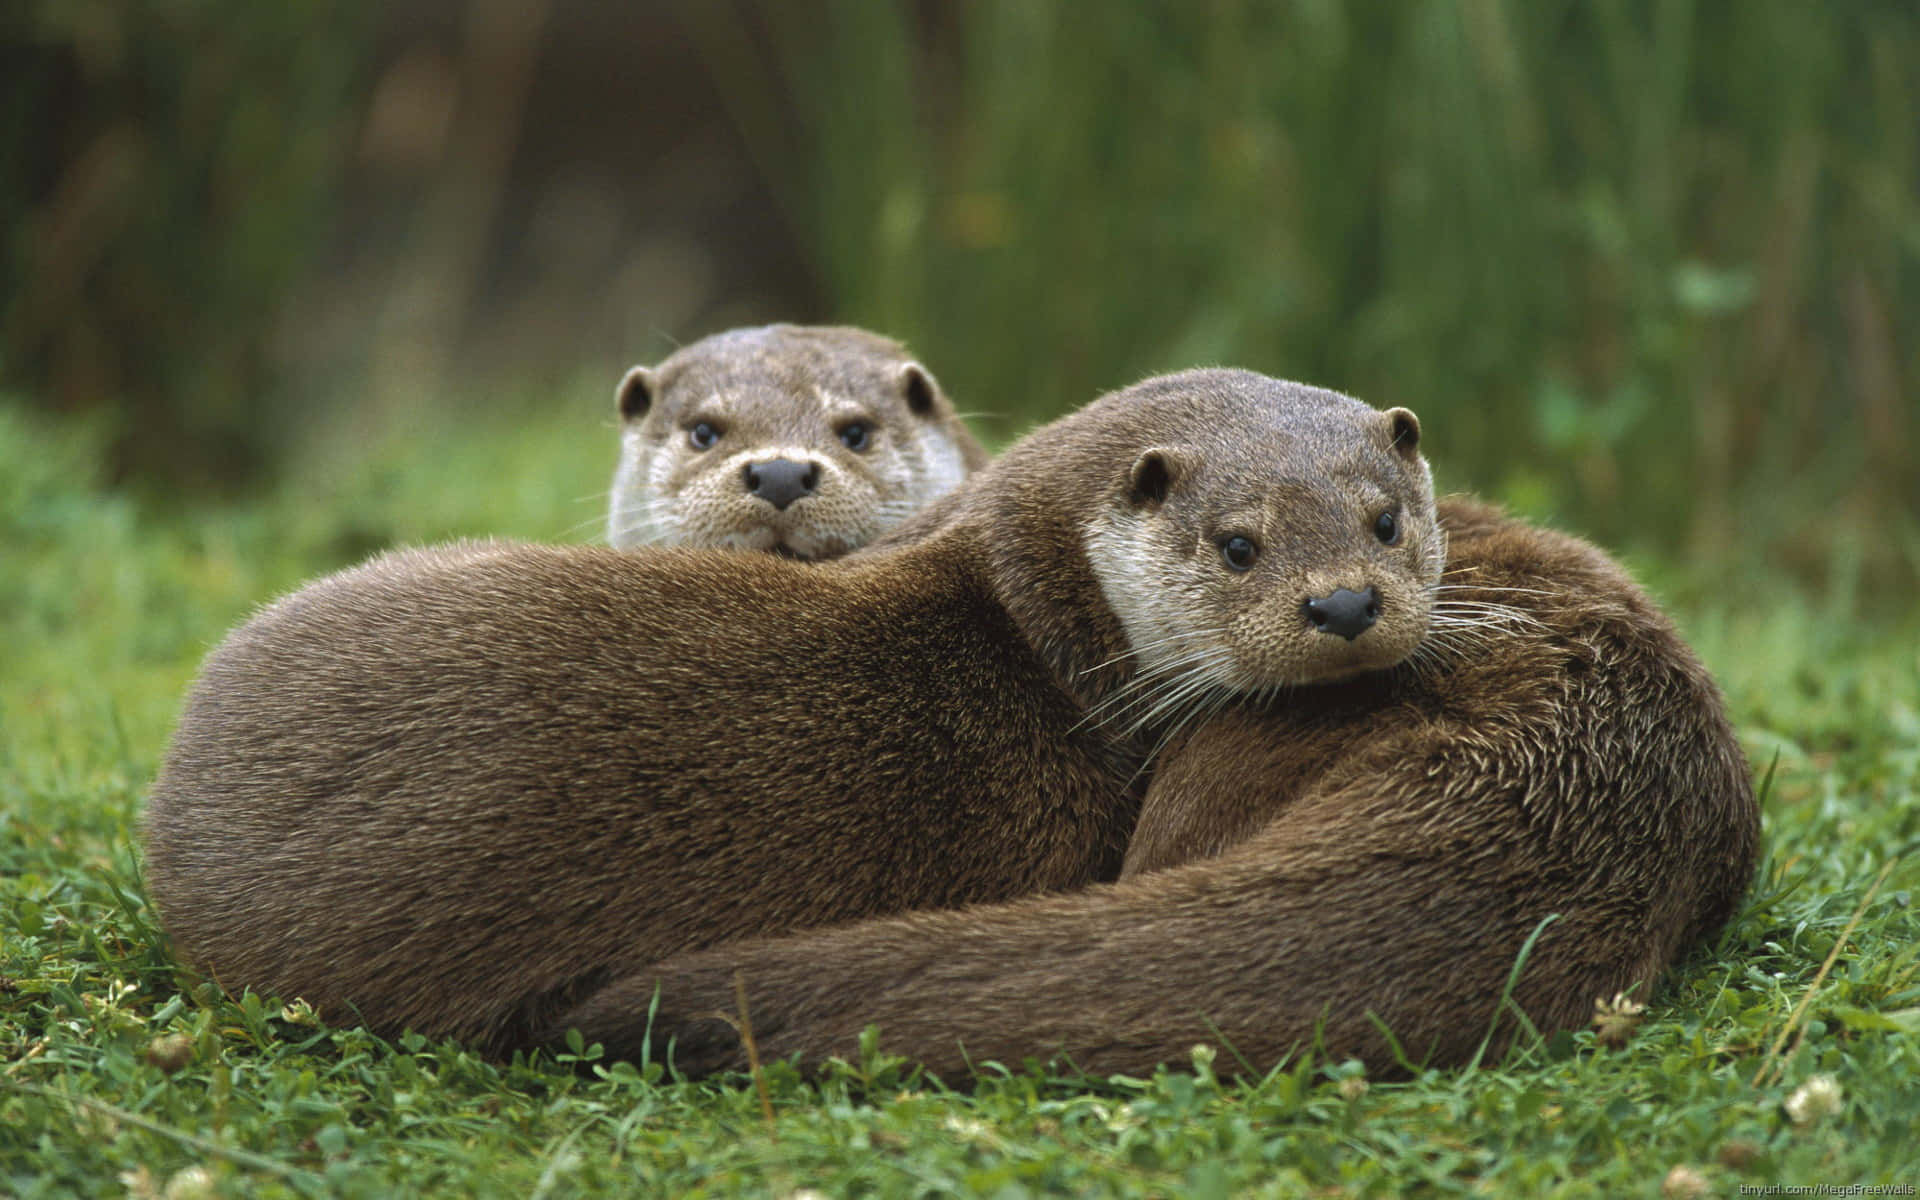 Two Otters Are Sitting Together In The Grass